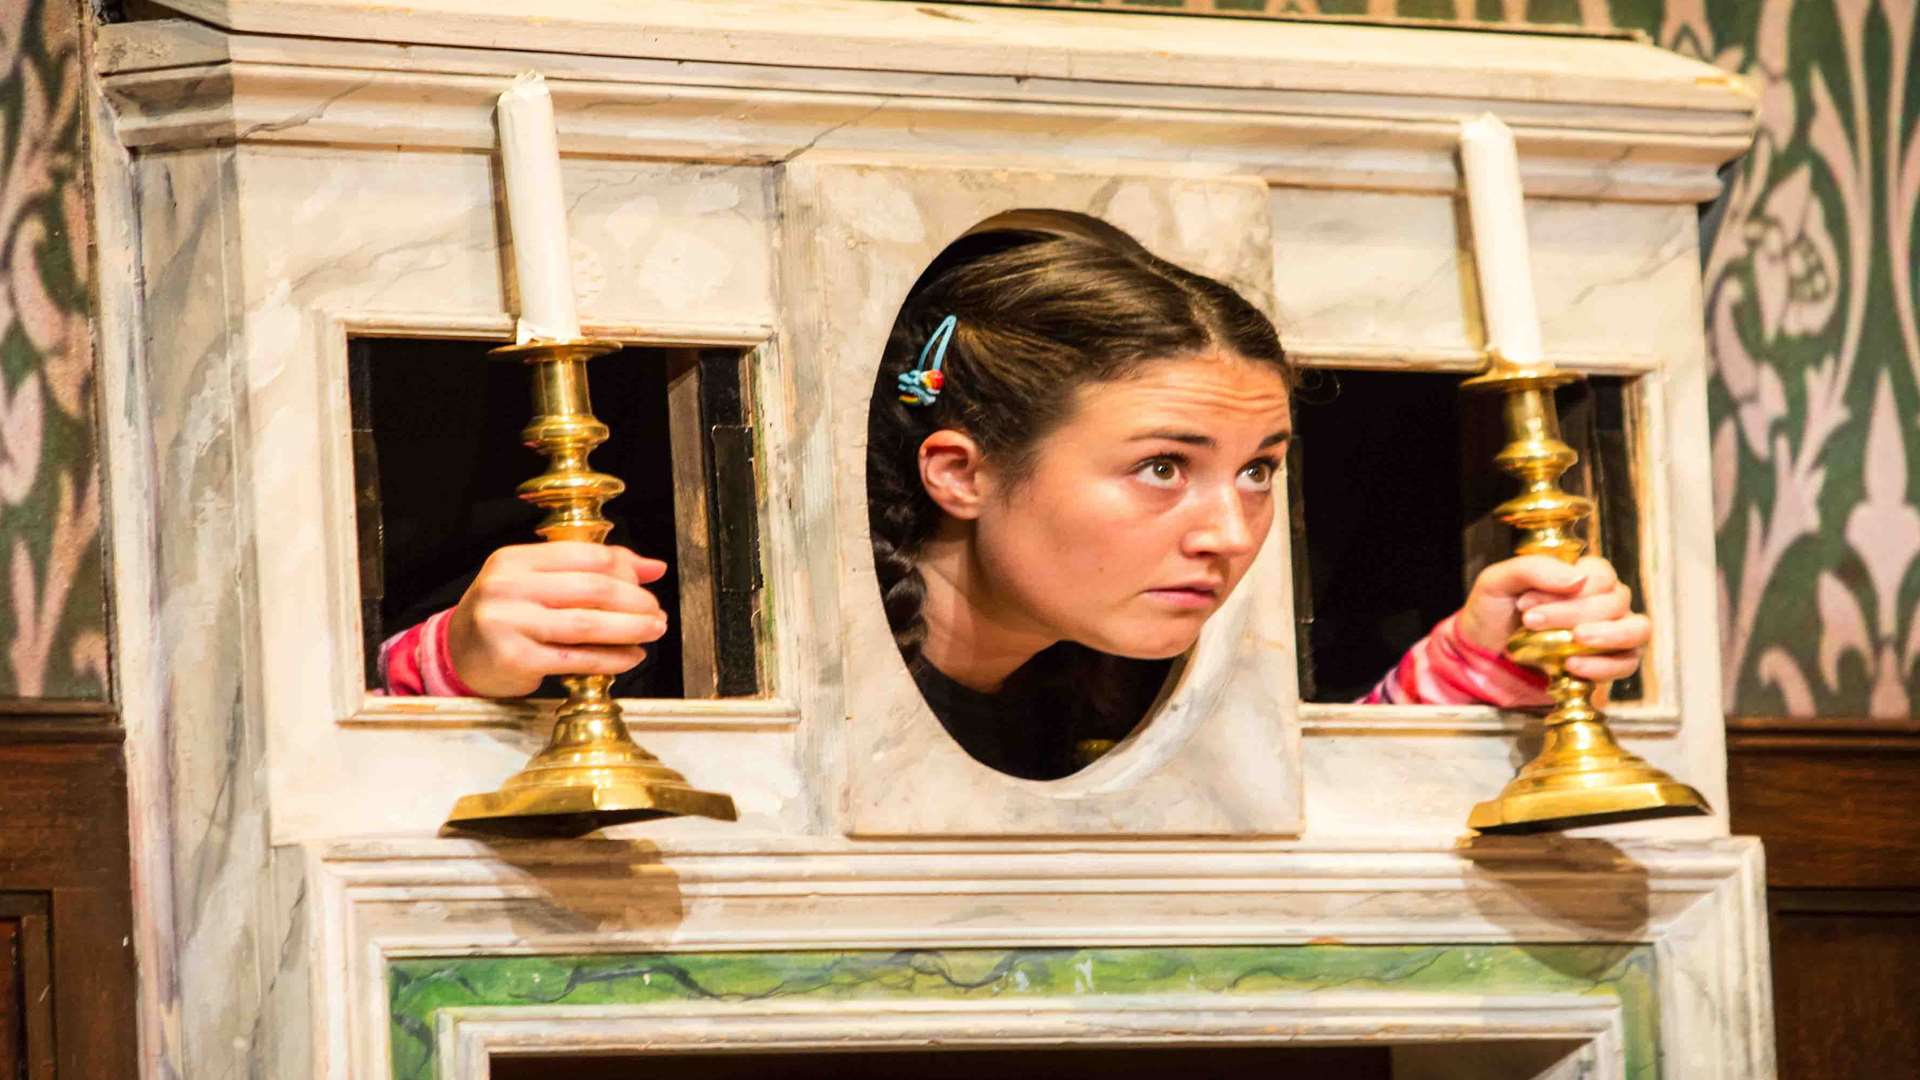 The Play That Goes Wrong is running at the Marlowe Theatre